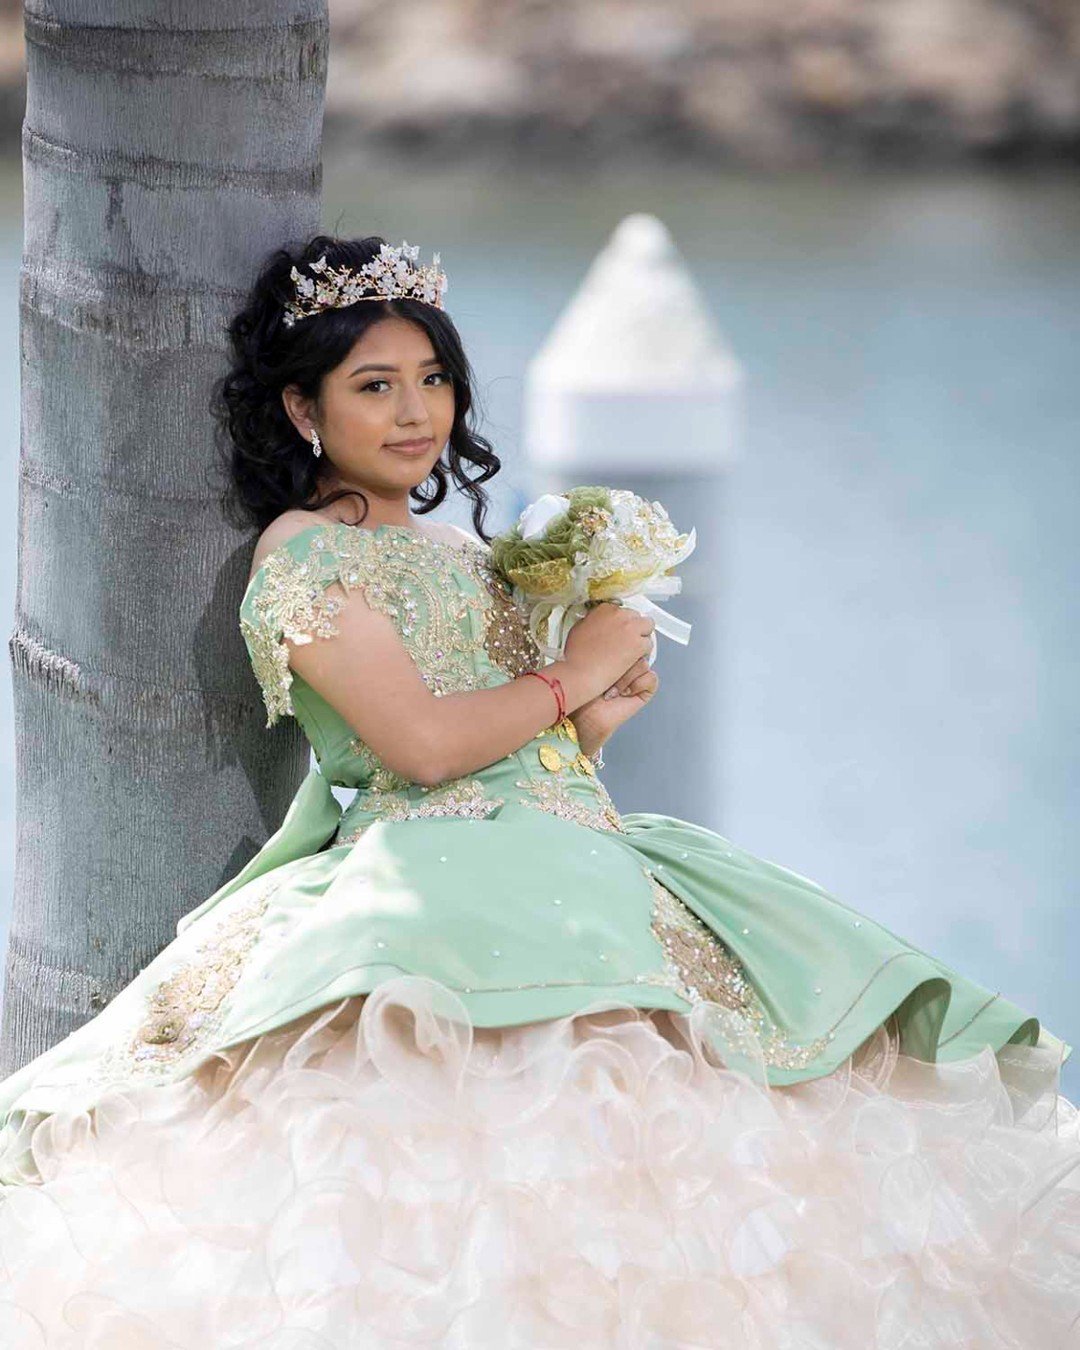 Beautiful Tradition! 😍 

Are you going to have a Quinceanera Event? Let us Help you!

Visit our Studio from Monday to Friday from 11am to 6pm
Address: 1936 Saviers Rd Oxnard CA 93033
Phone: (805) 487-5154

Hablamos Espanol!

#quincea&ntilde;era #pho